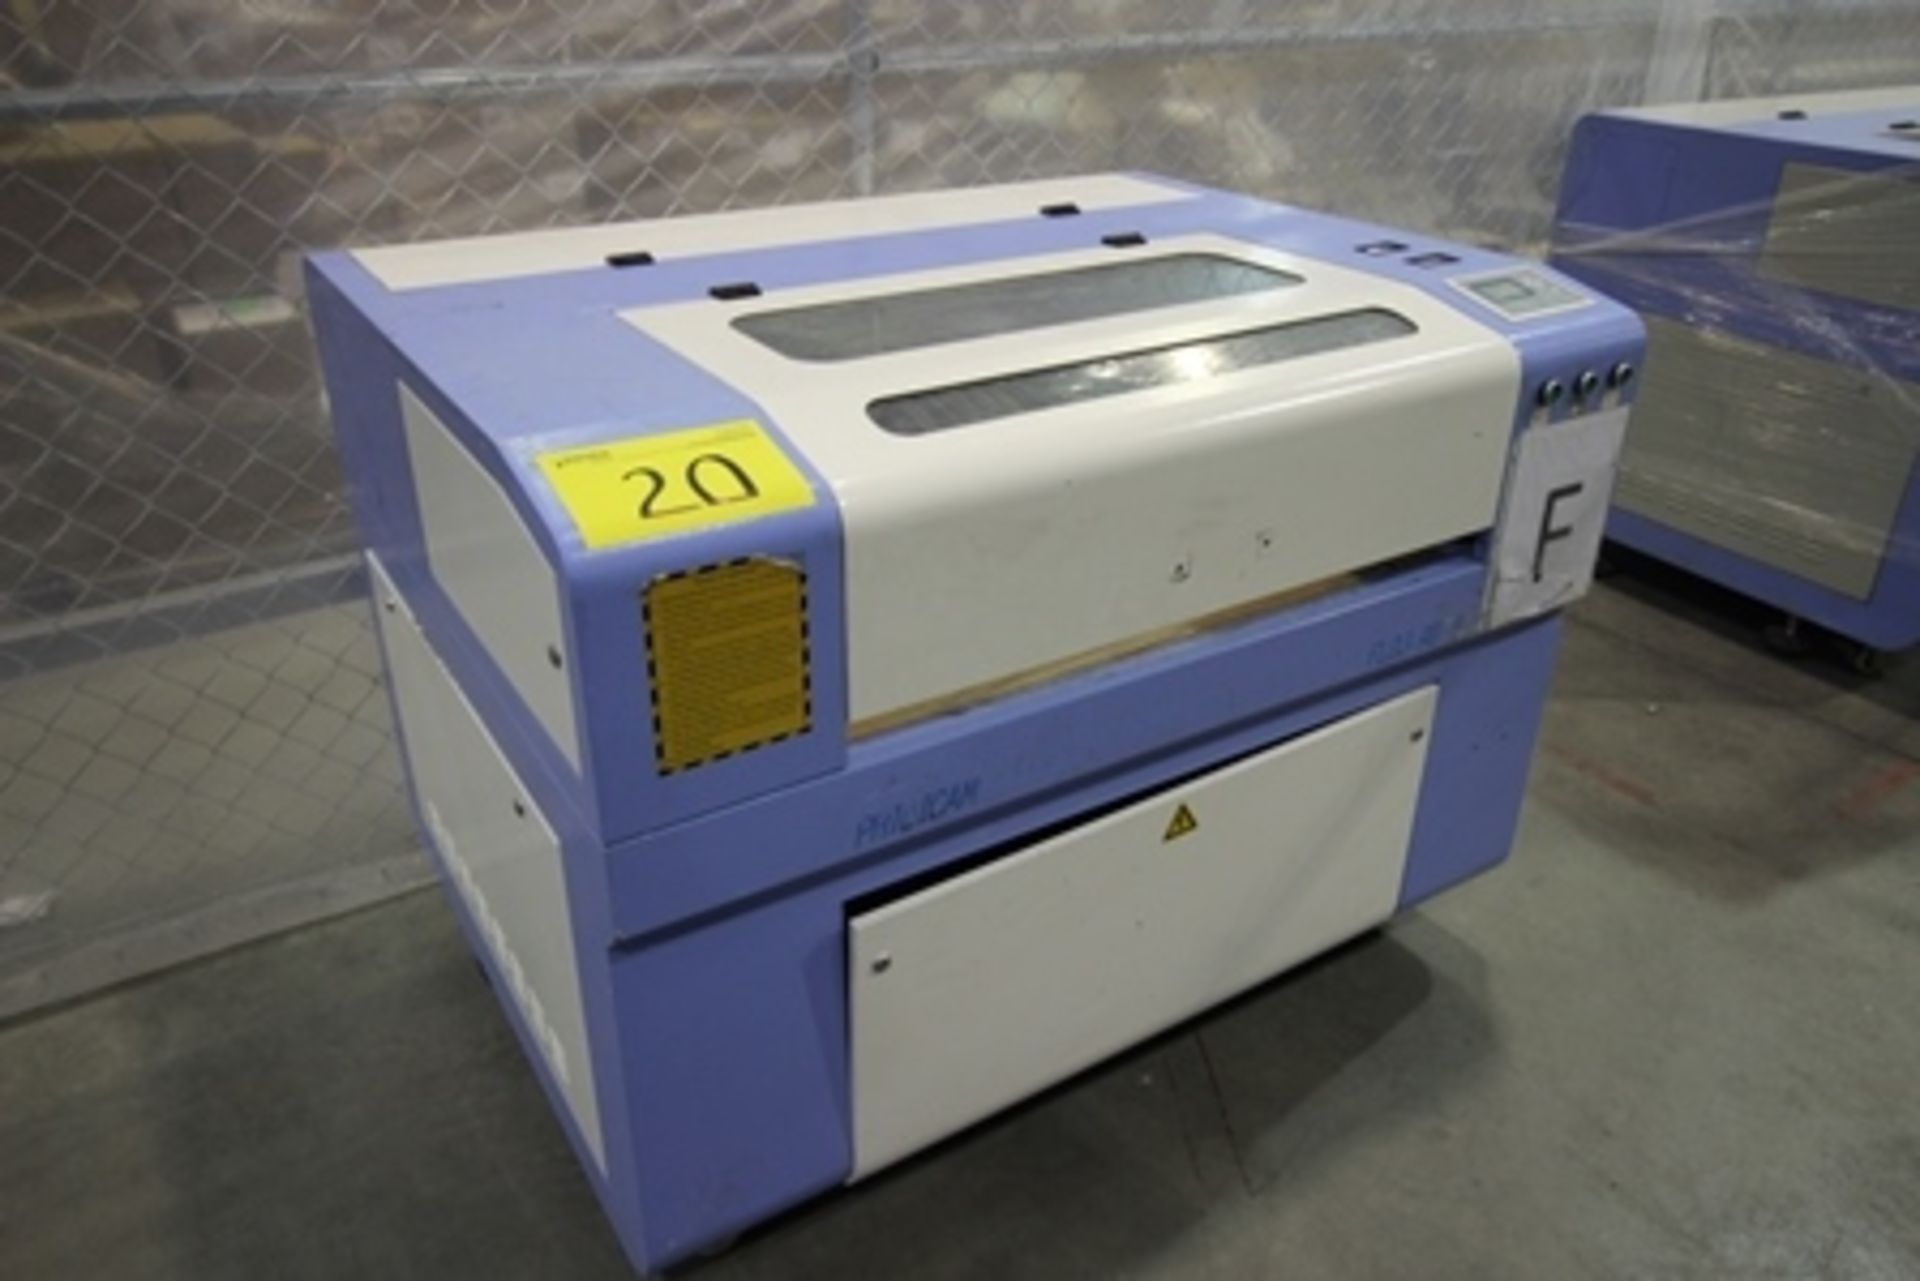 Phillican CO2 laser engraver and cutting machine, model 6090. - Image 2 of 23